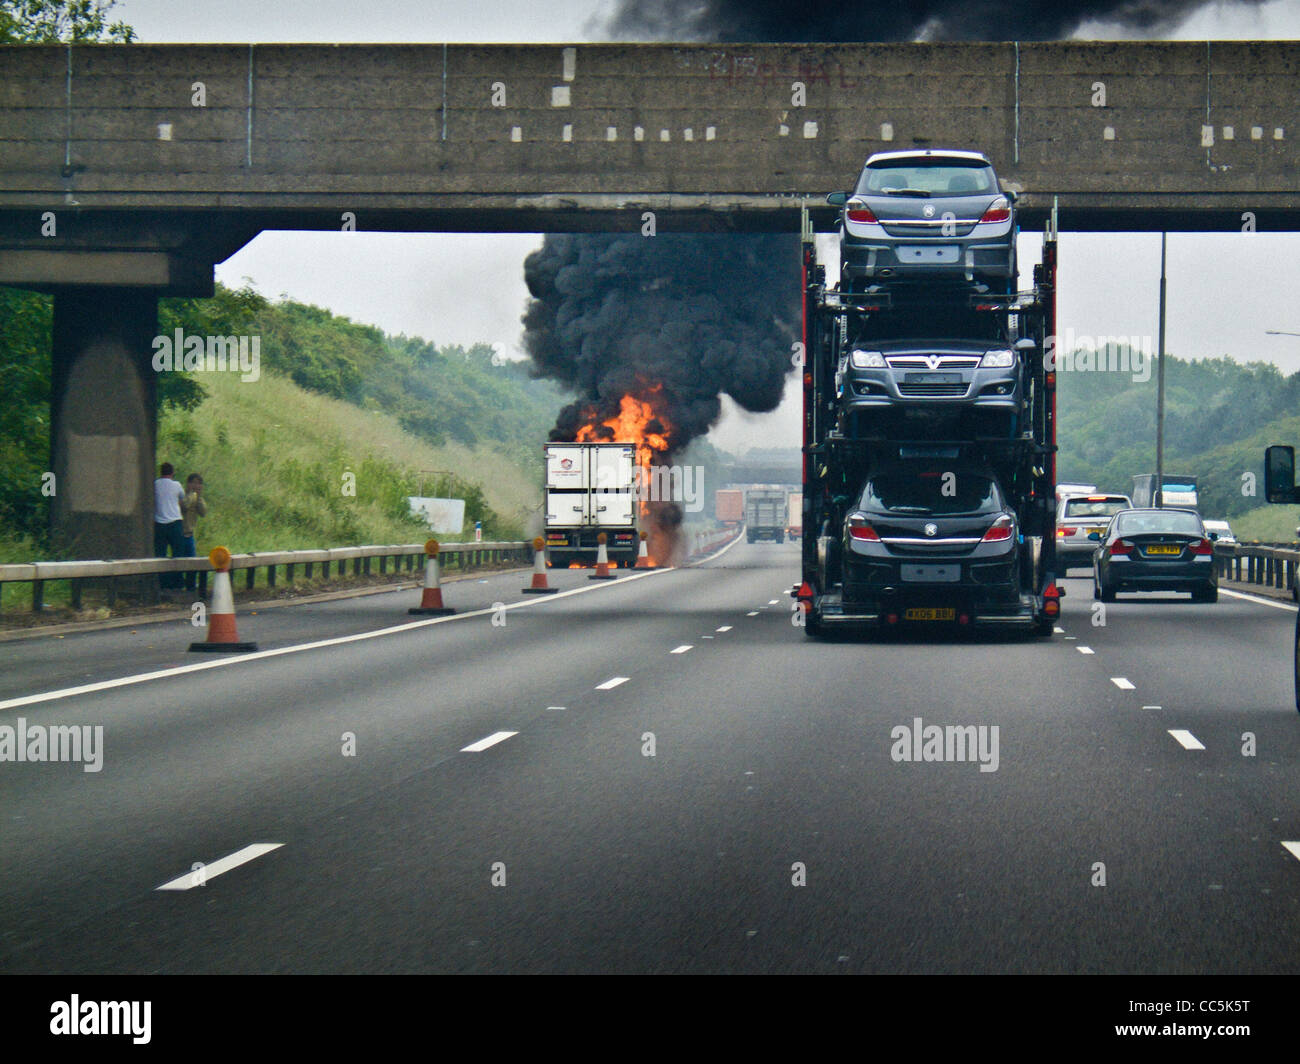 Lorry on fire, on the hand shoulder of the M1 motorway. UK Stock Photo